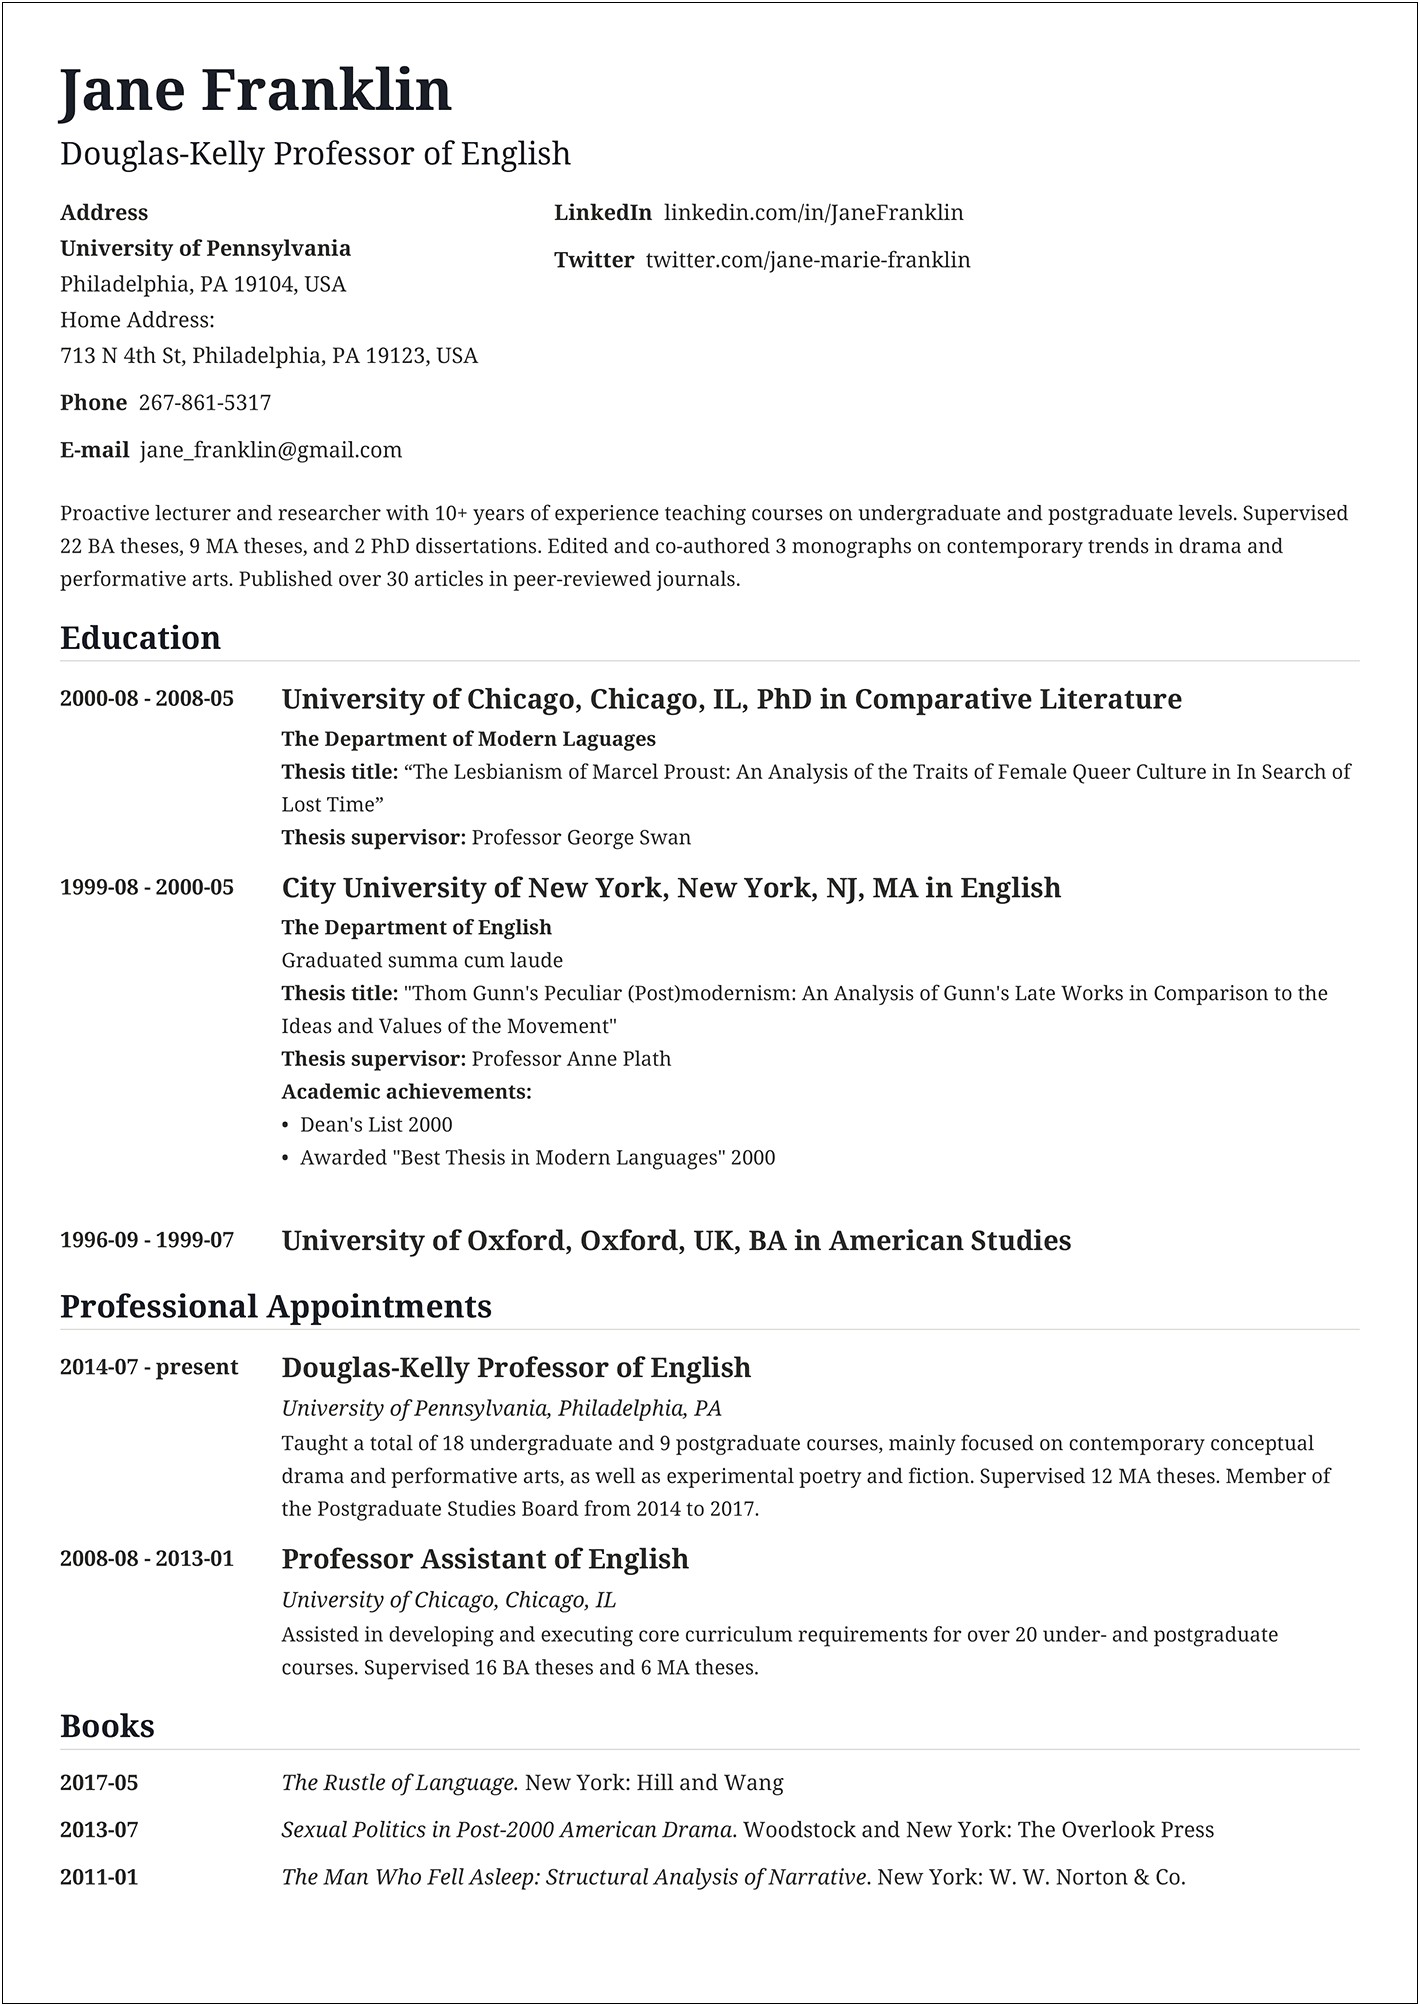 Examples Of Effective Resumes For Jobs